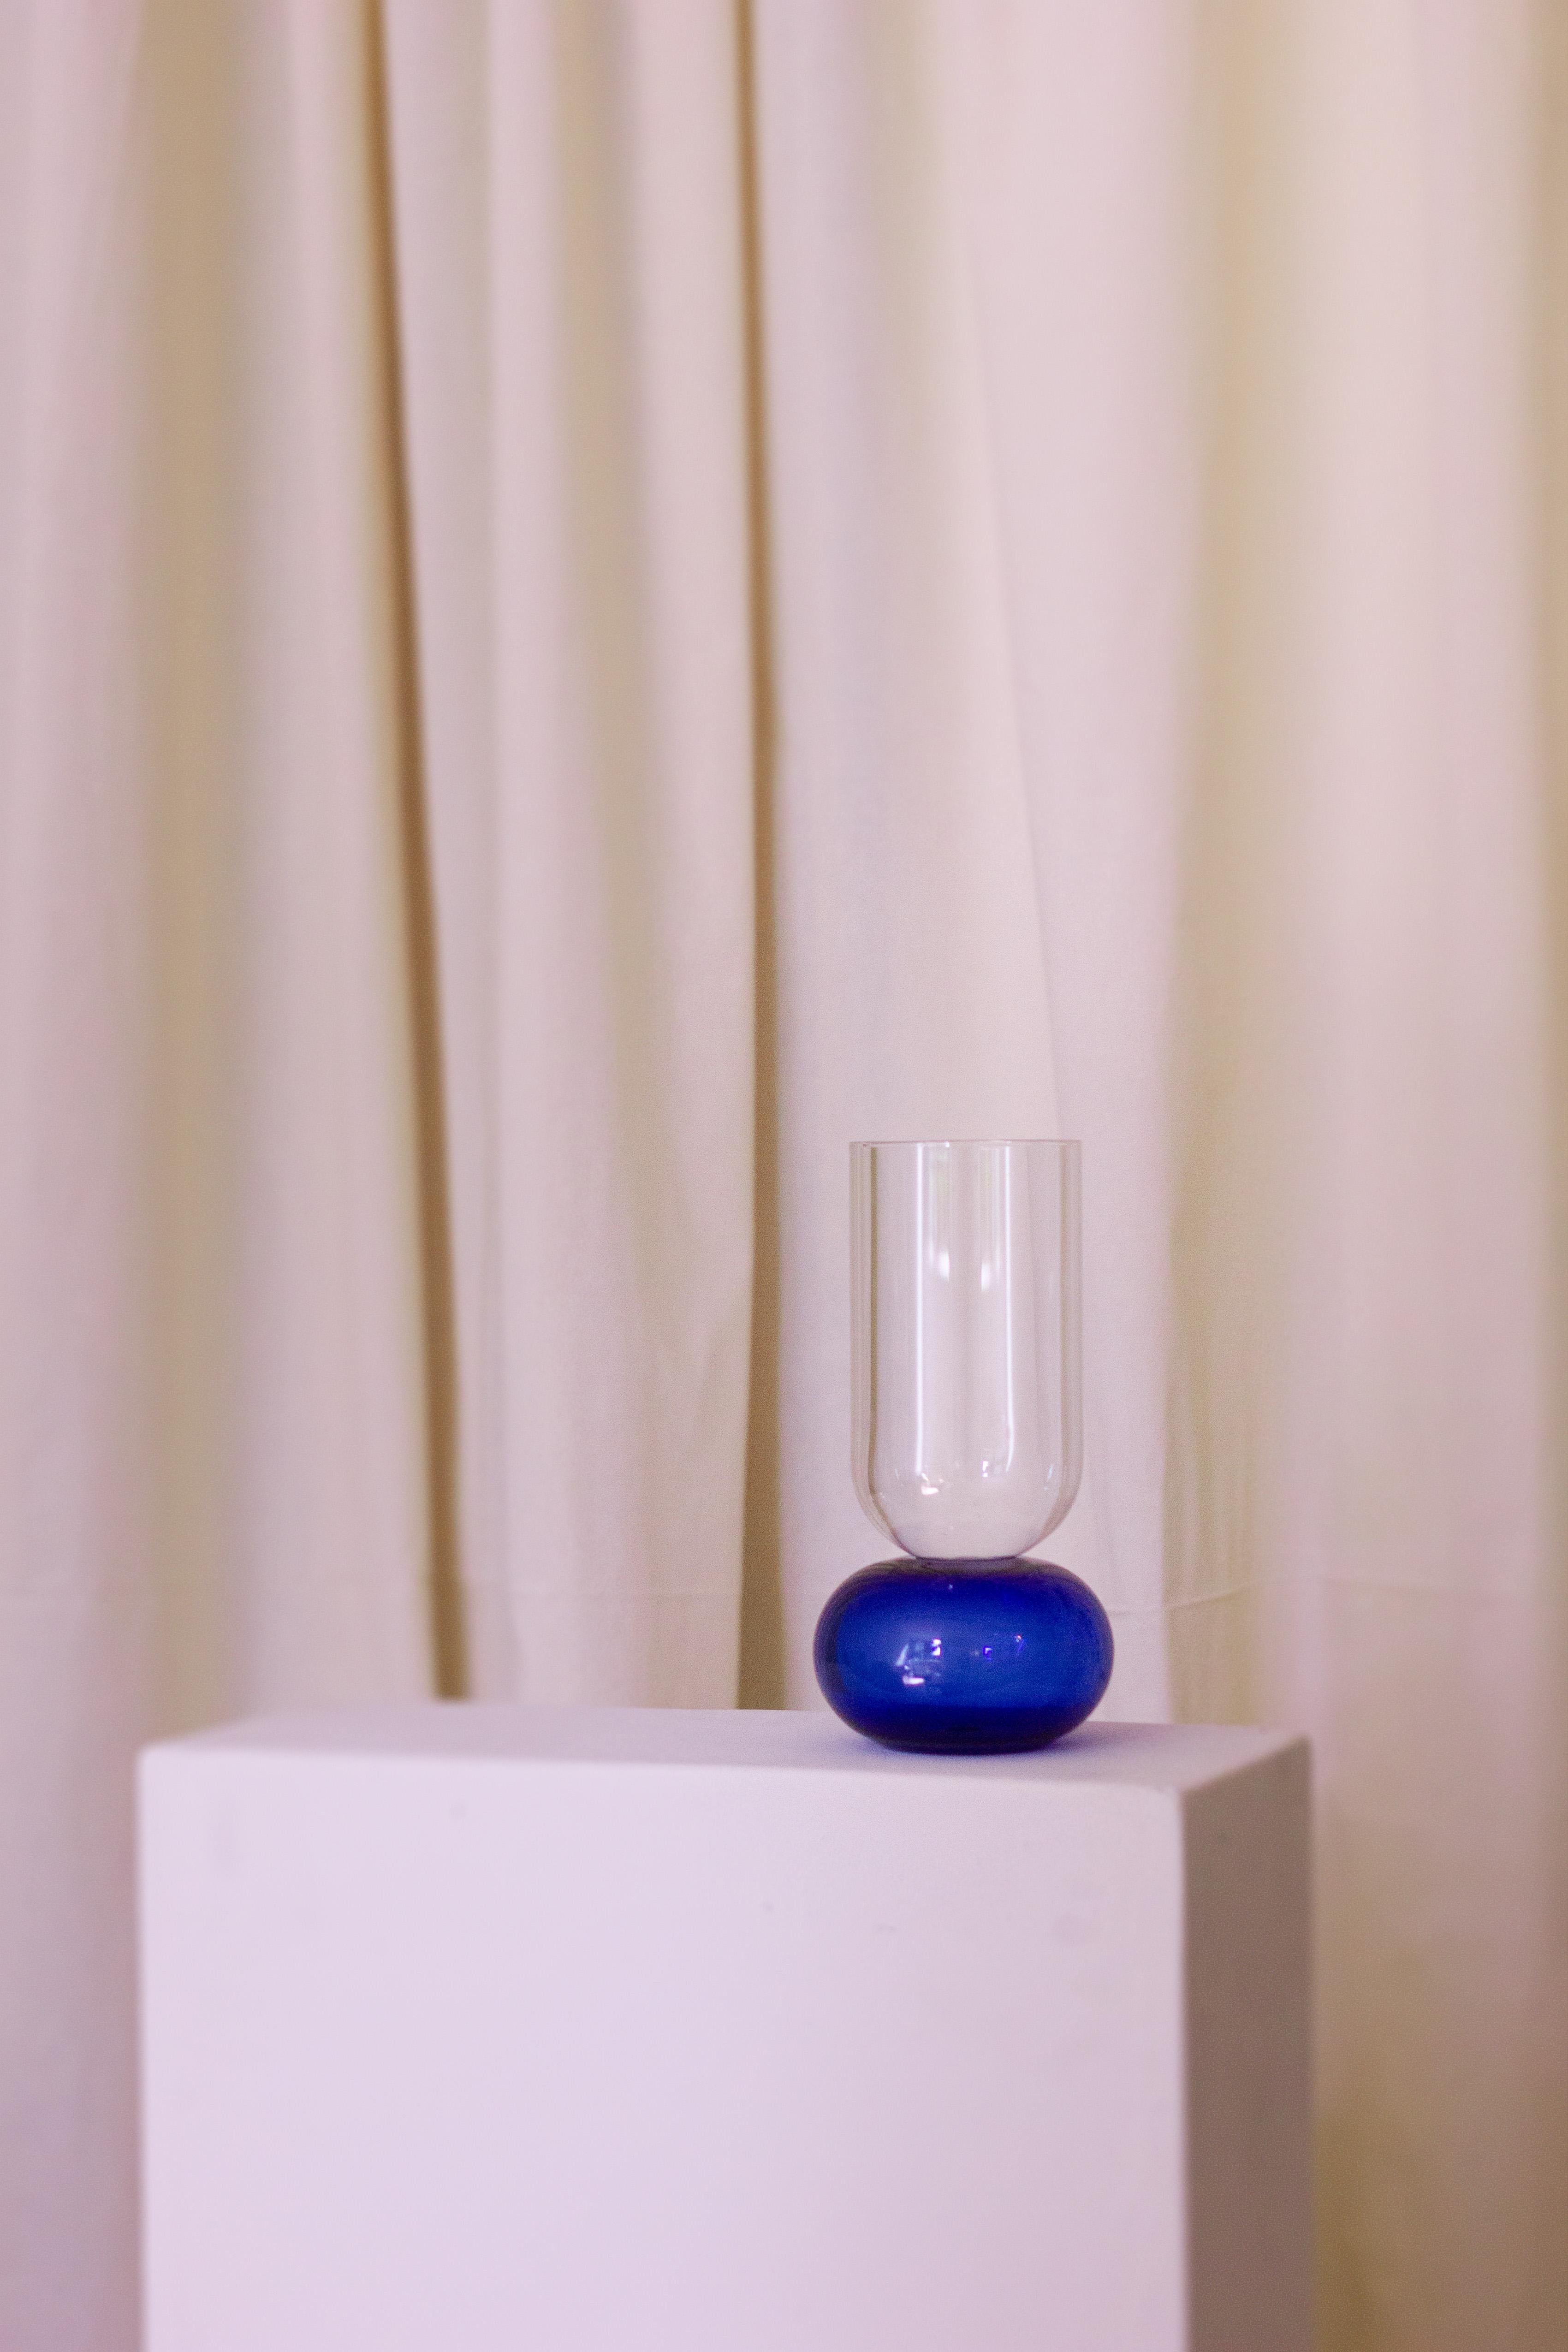 This charming vase handcrafted of fine crystal is a showcase of pure volumes. Its elegant silhouette is composed of a spherical, blue base sustaining the cylindrical, clear body. Crafted following traditional, 19th-century techniques, this stunning